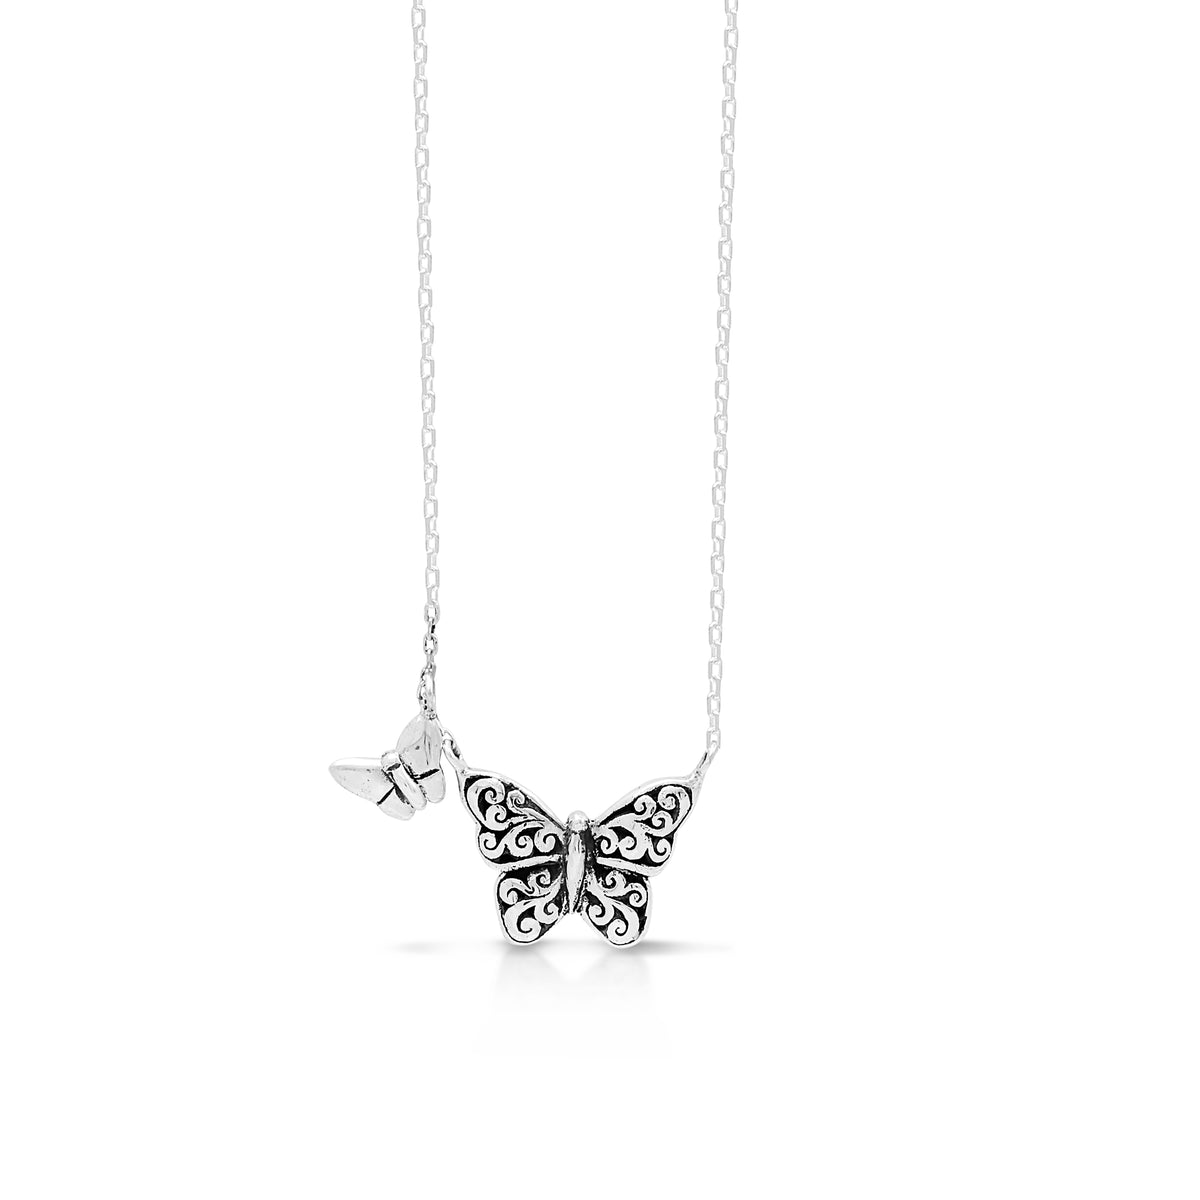 LH Signature Scroll Sterling Silver Delicate Double Butterflies Pendant Necklace in 18" Adjustable Chain.  Pendant Size 11 mm - Lois Hill Jewelry